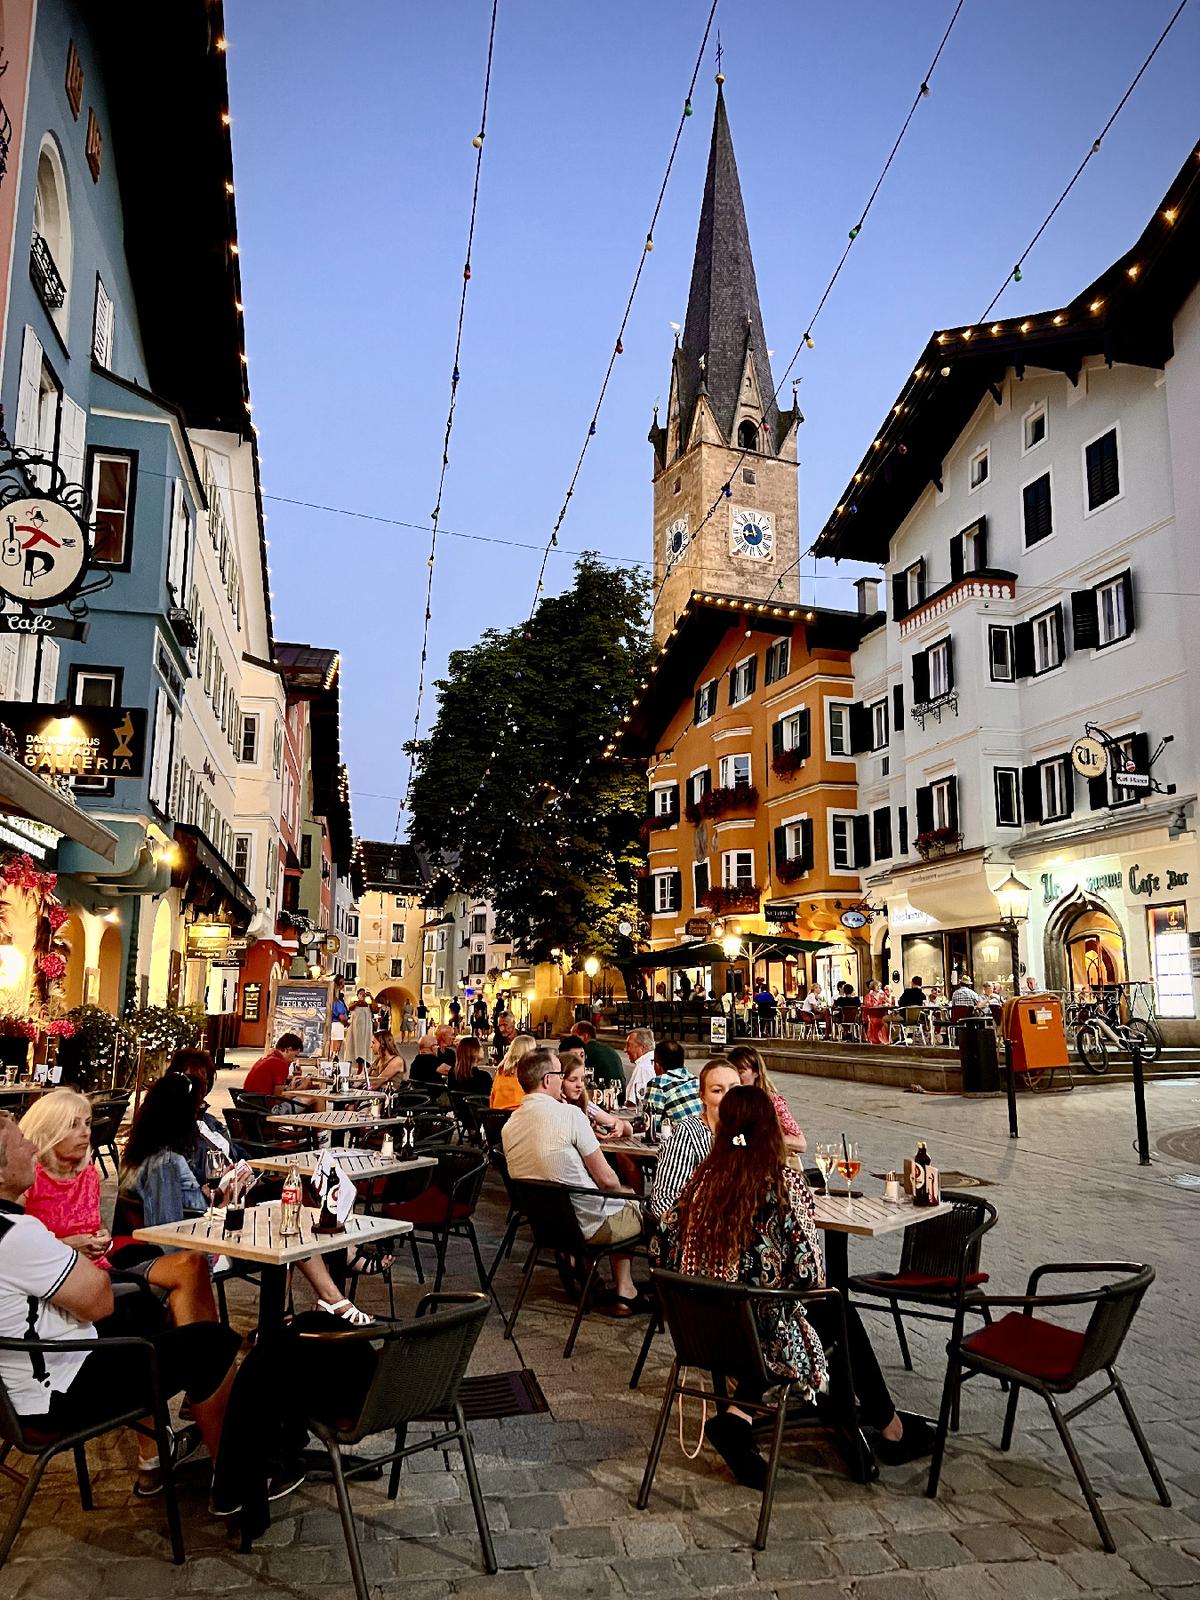 The stunning medieval streets of Kitzbuhel, Austria, come to life in the evenings. (Courtesy of Margot Black)